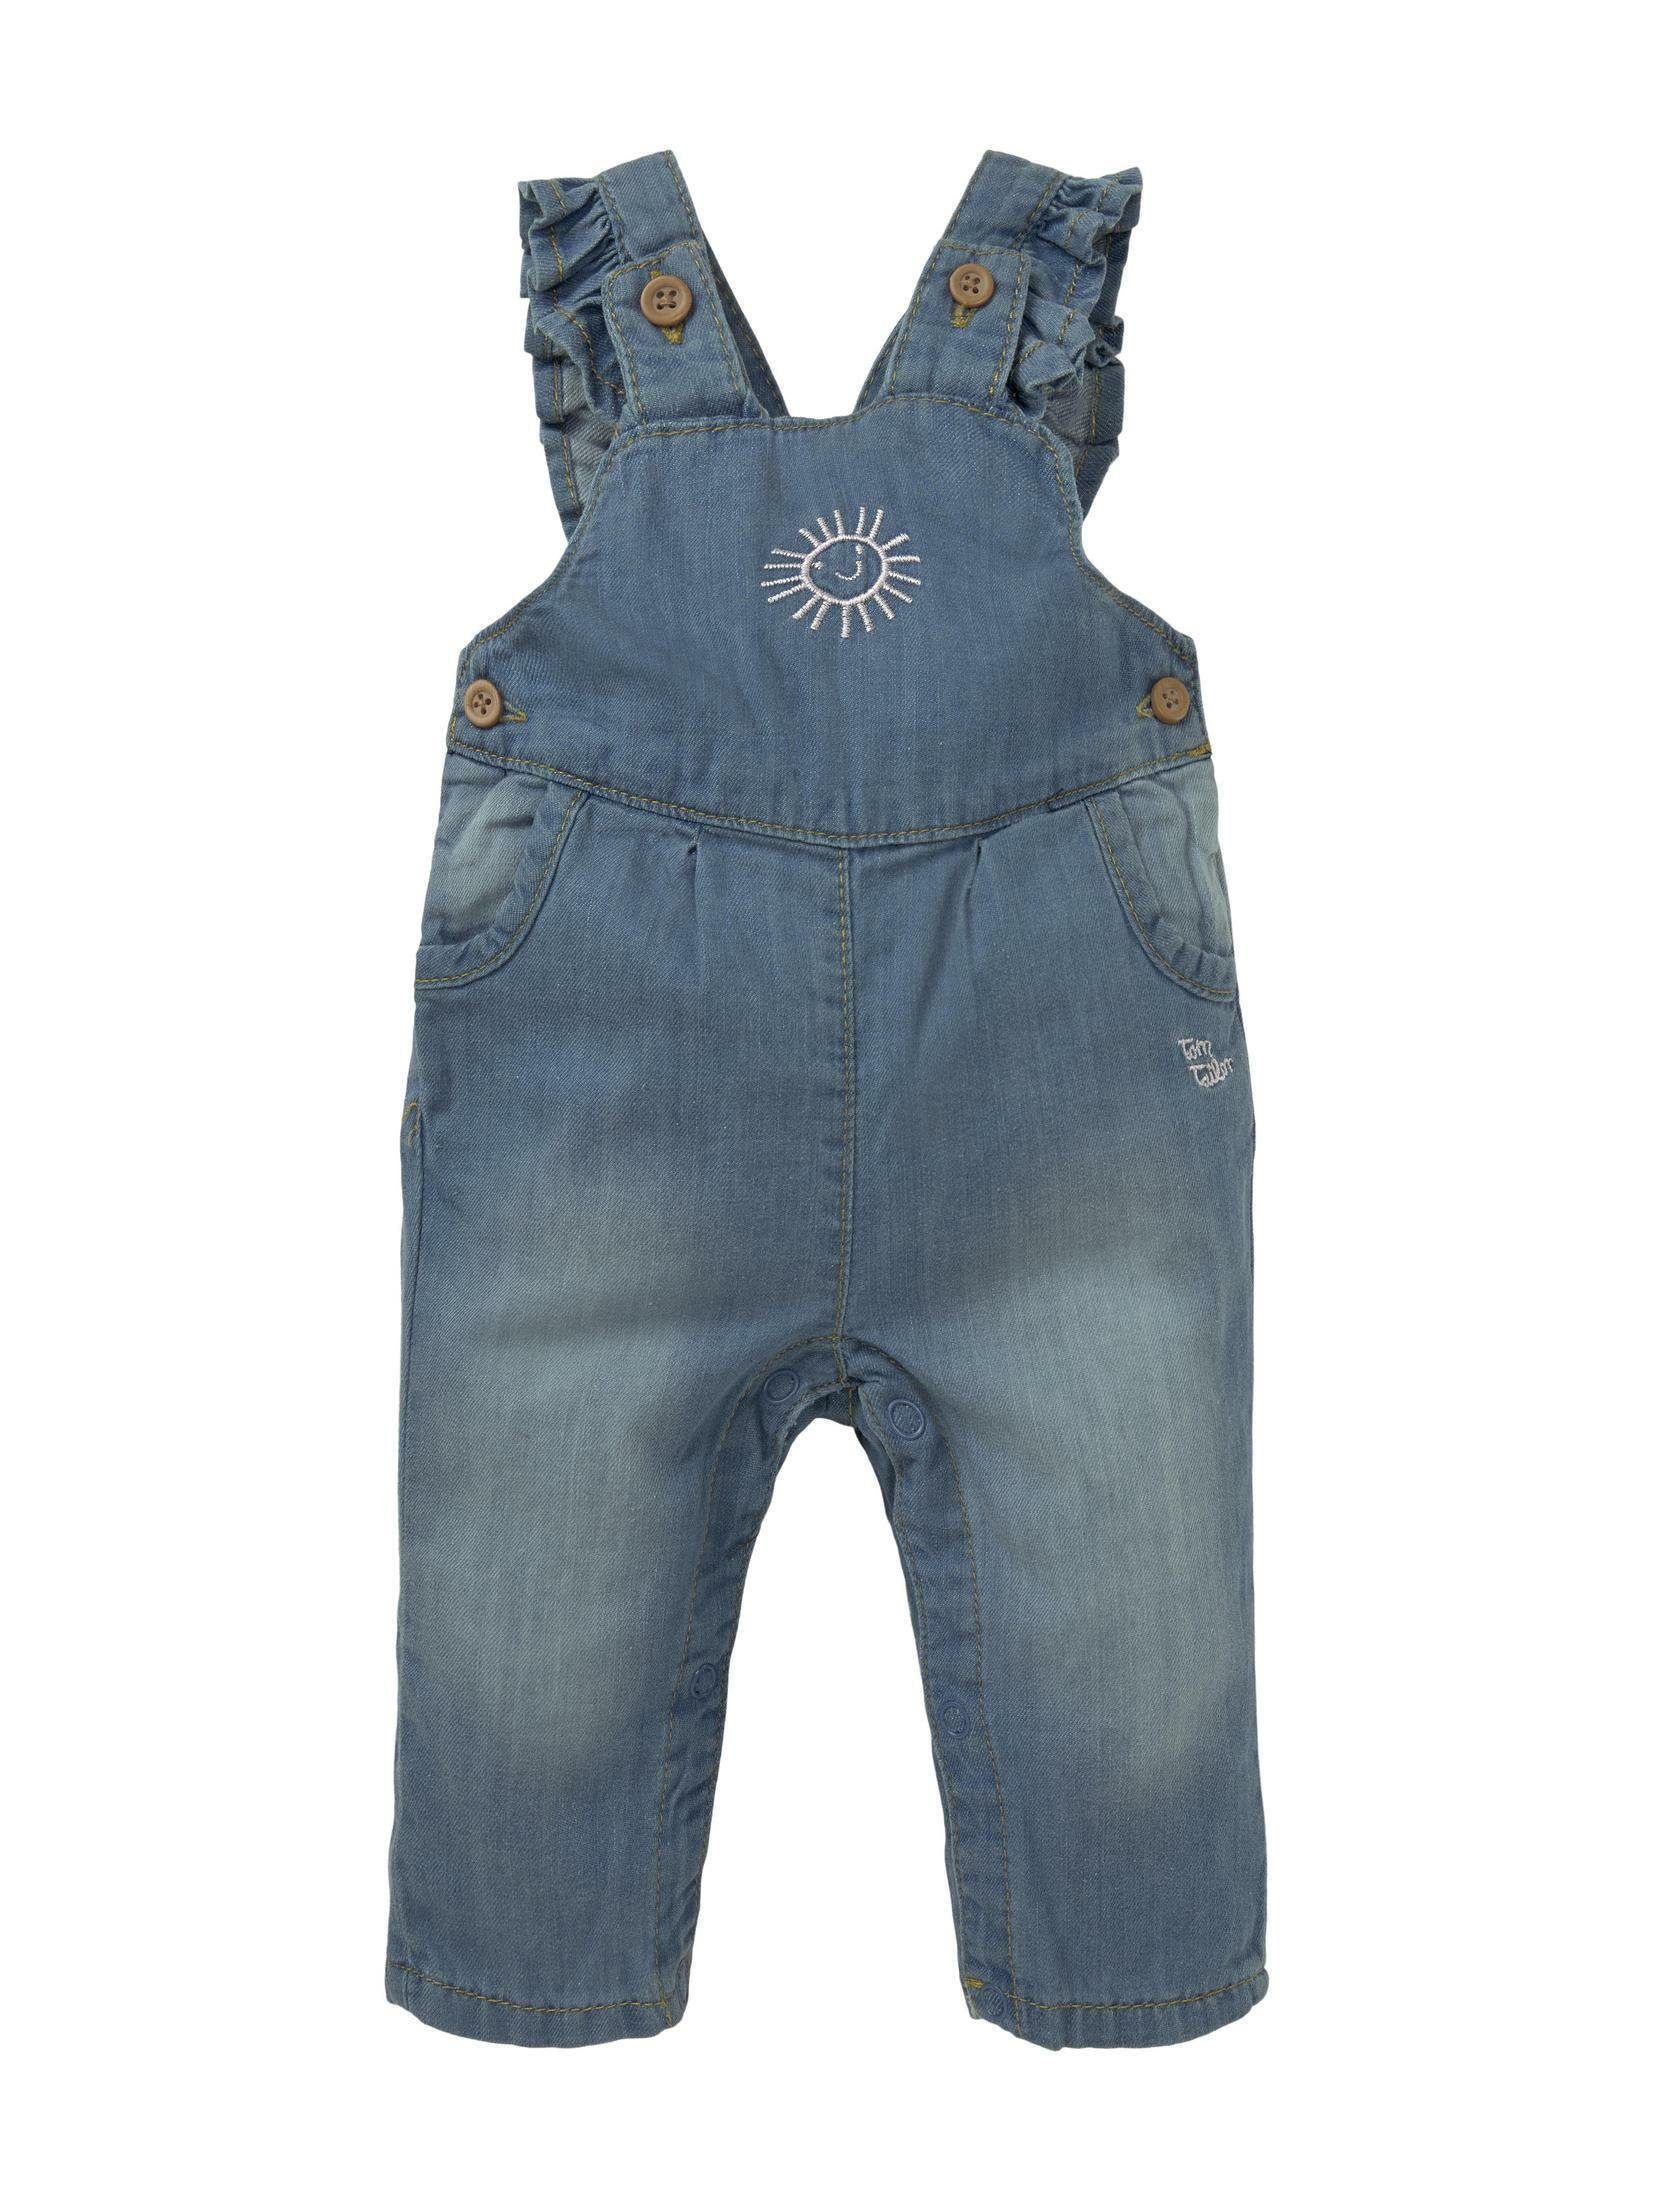 TOM TAILOR Latzhose Jeans Overall